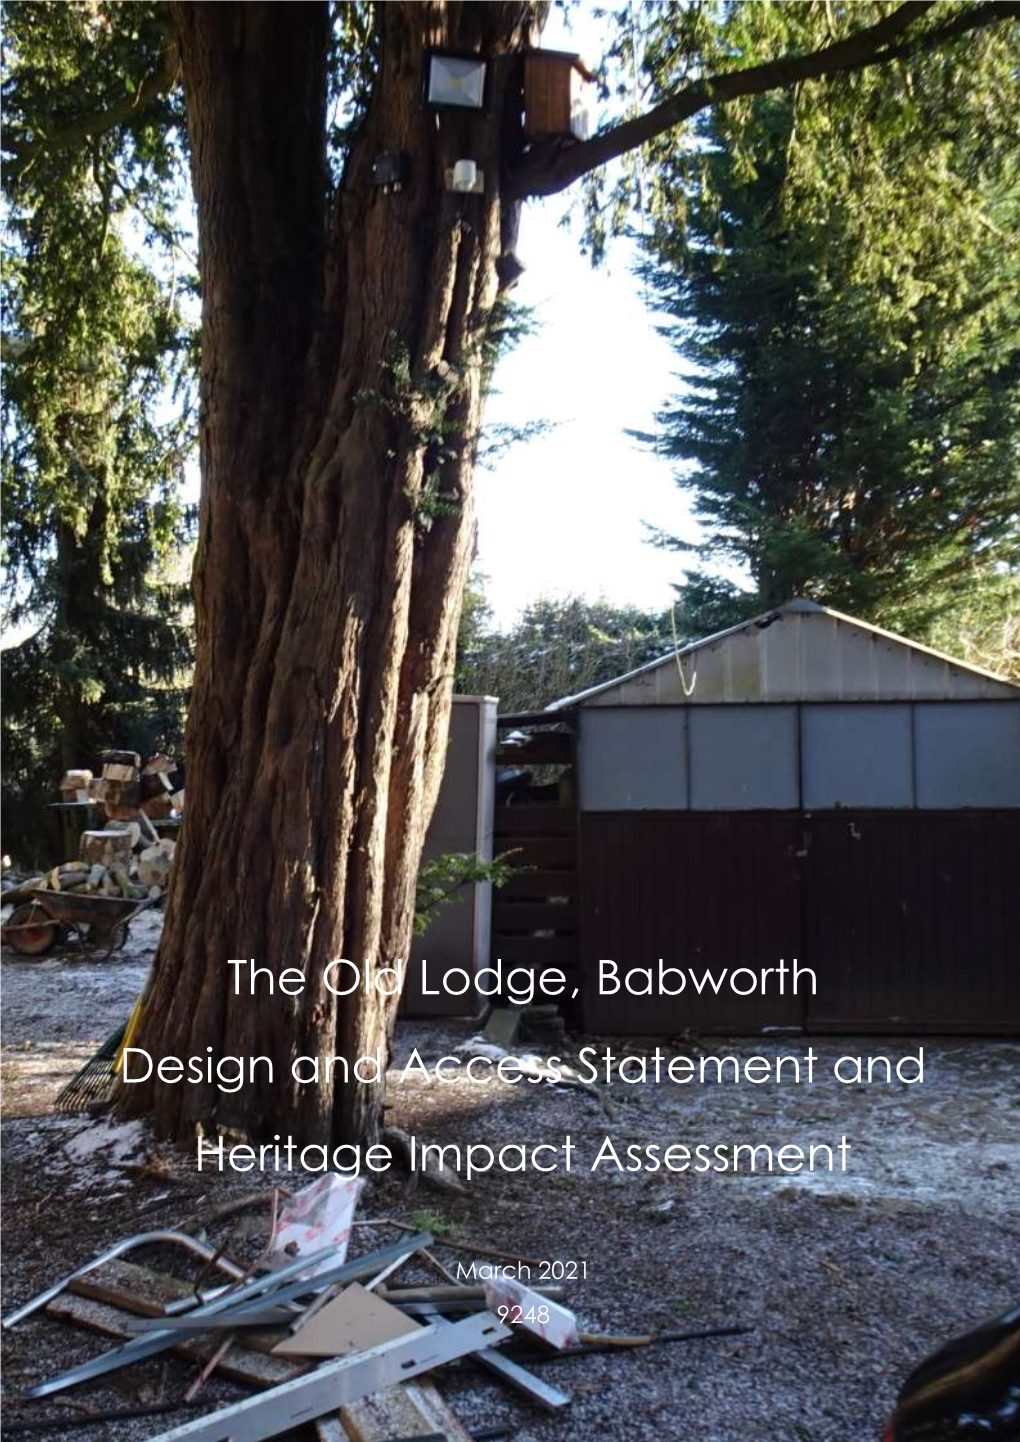 The Old Lodge, Babworth Design and Access Statement and Heritage Impact Assessment